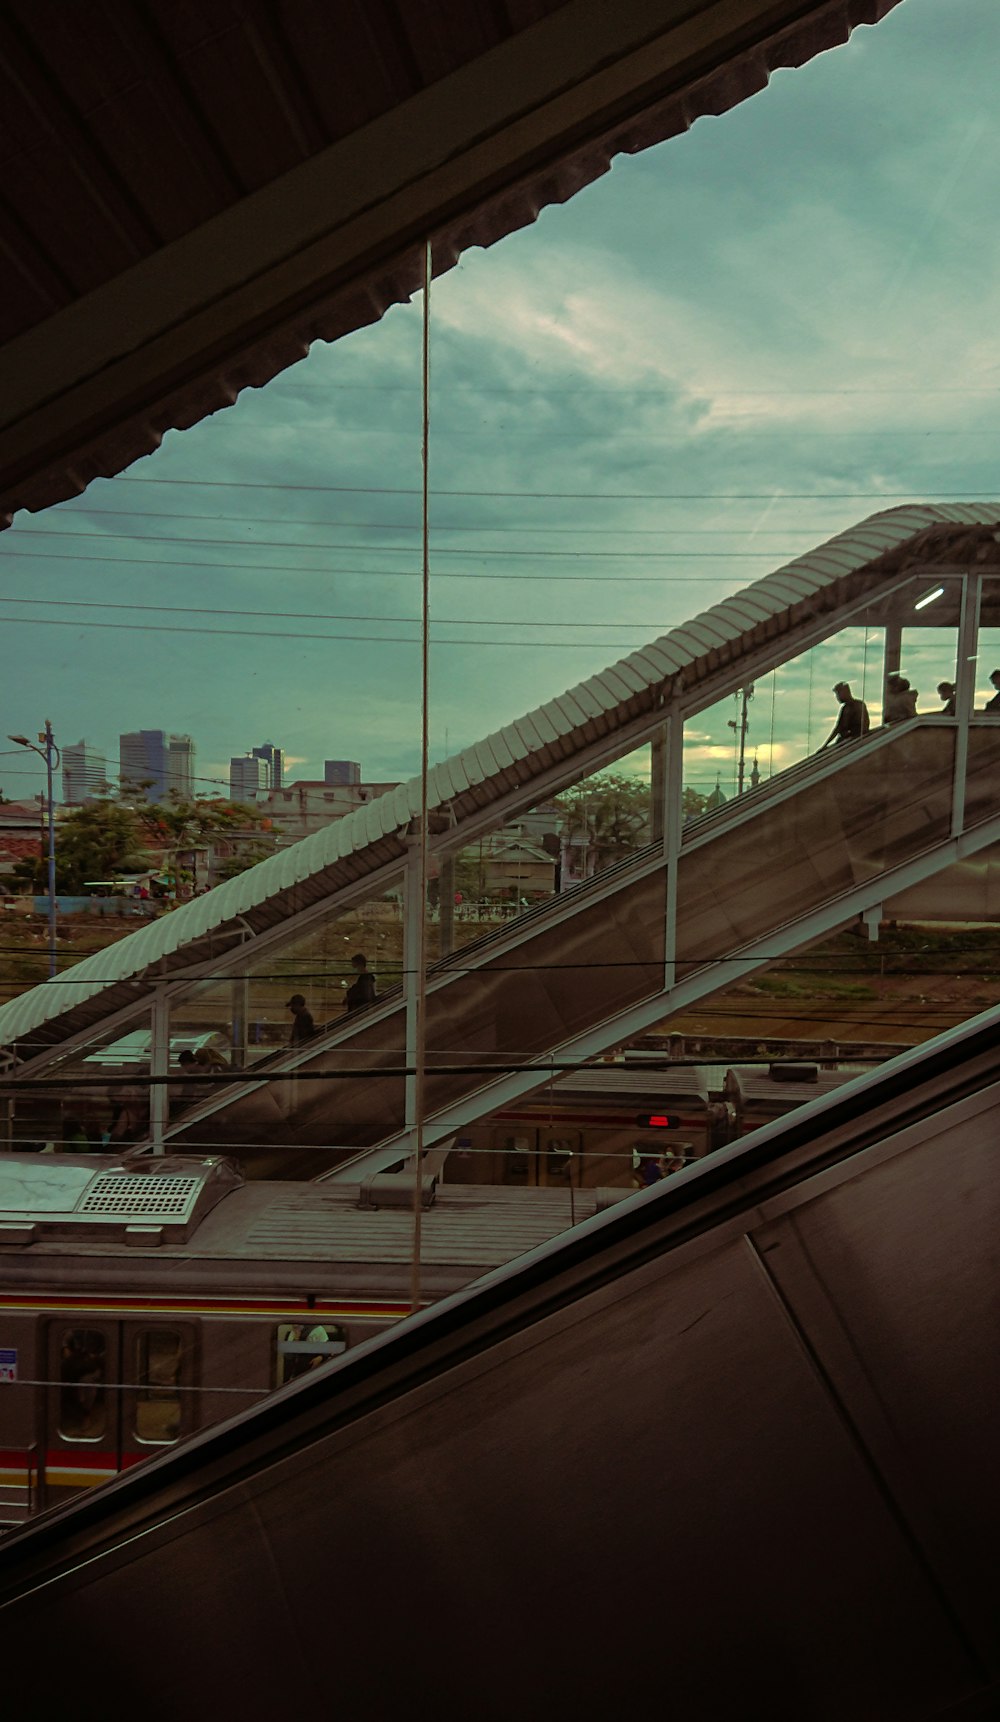 an escalator going up a hill with people on it